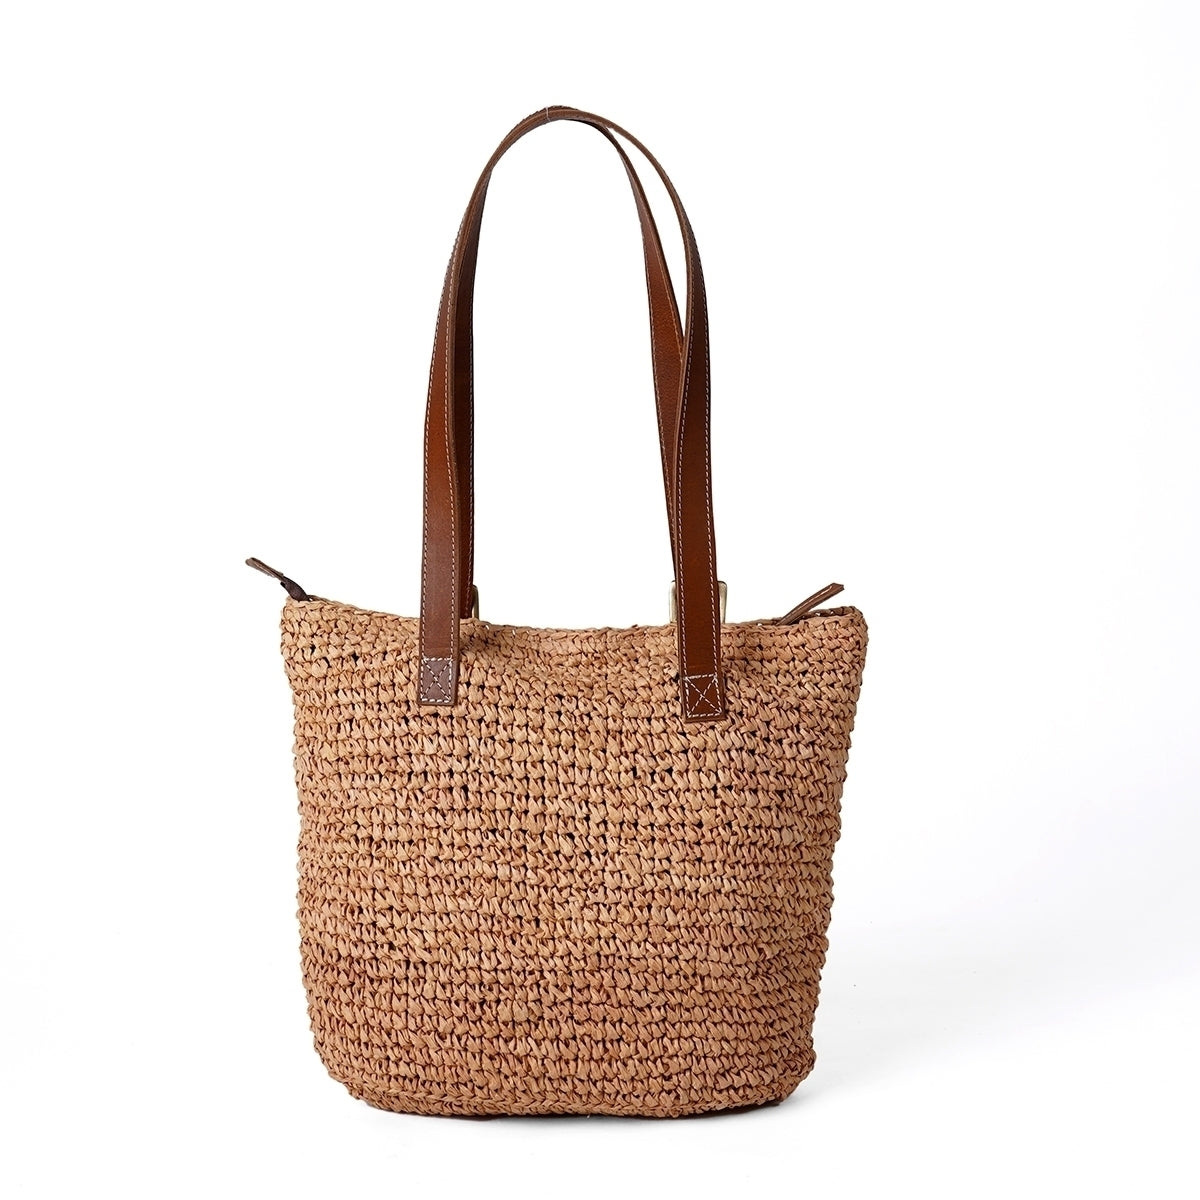 Natural colour Rafia Tote bag with real tan leather handle